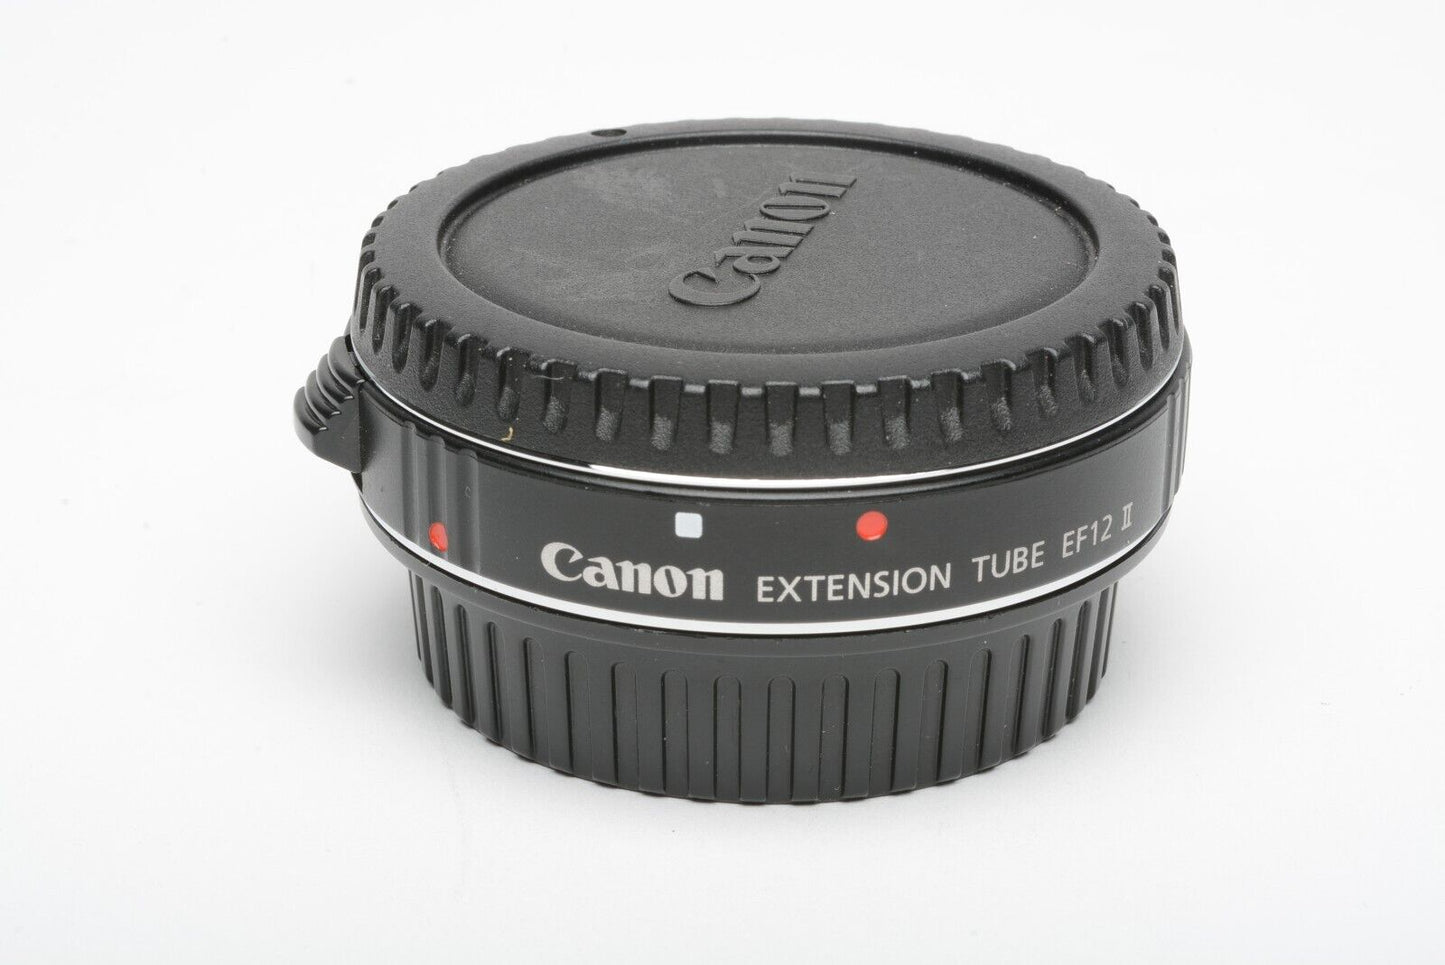 MINT- BOXED CANON EF12 II EXTENSION TUBE w/CAPS, POUCH, BARELY USED